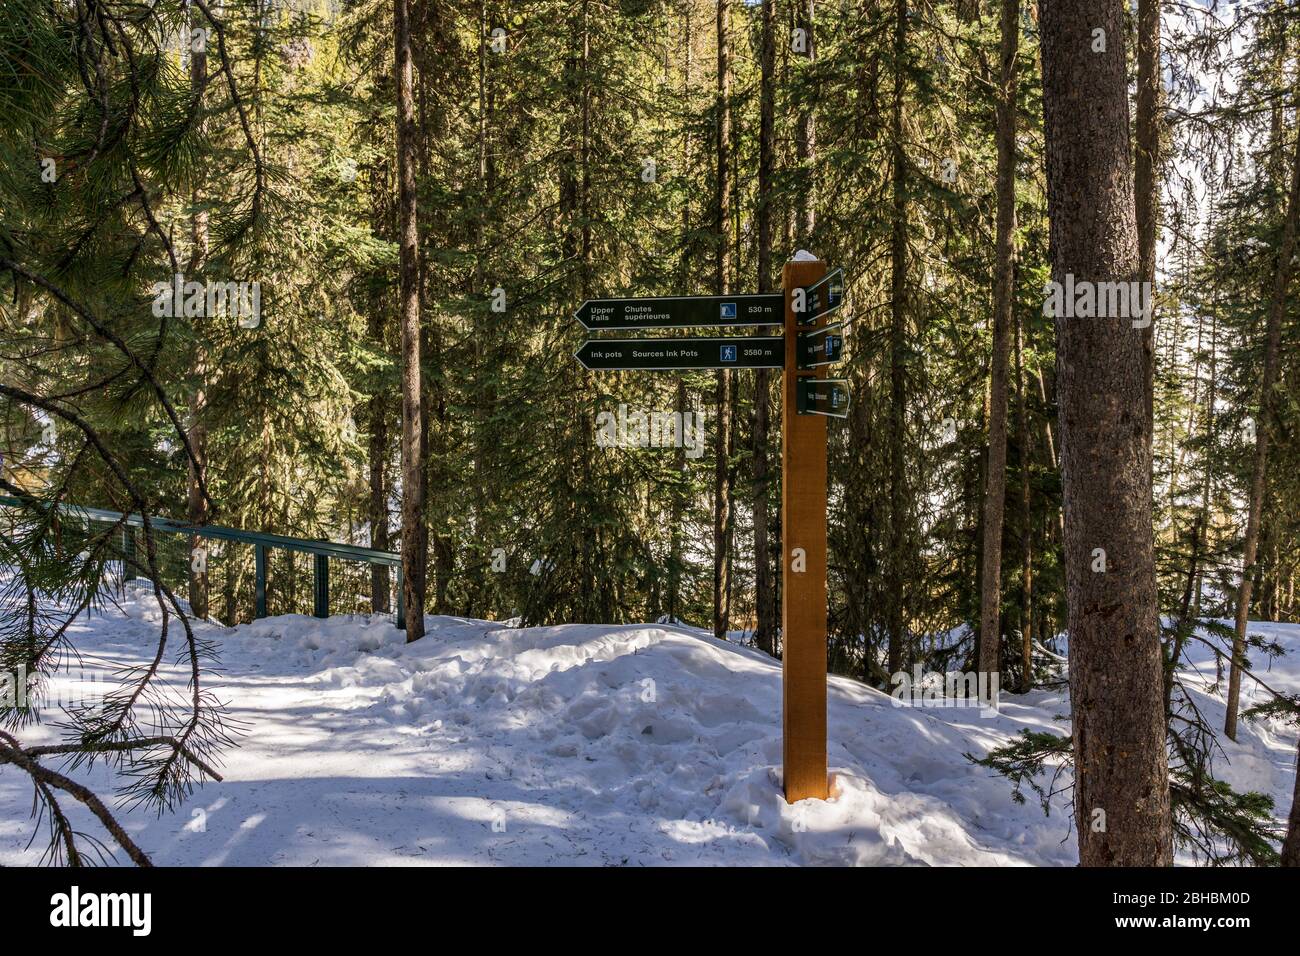 BANF, CANADA - MARCH 20, 2020: path in the forest winter landscape hiking trail. Stock Photo